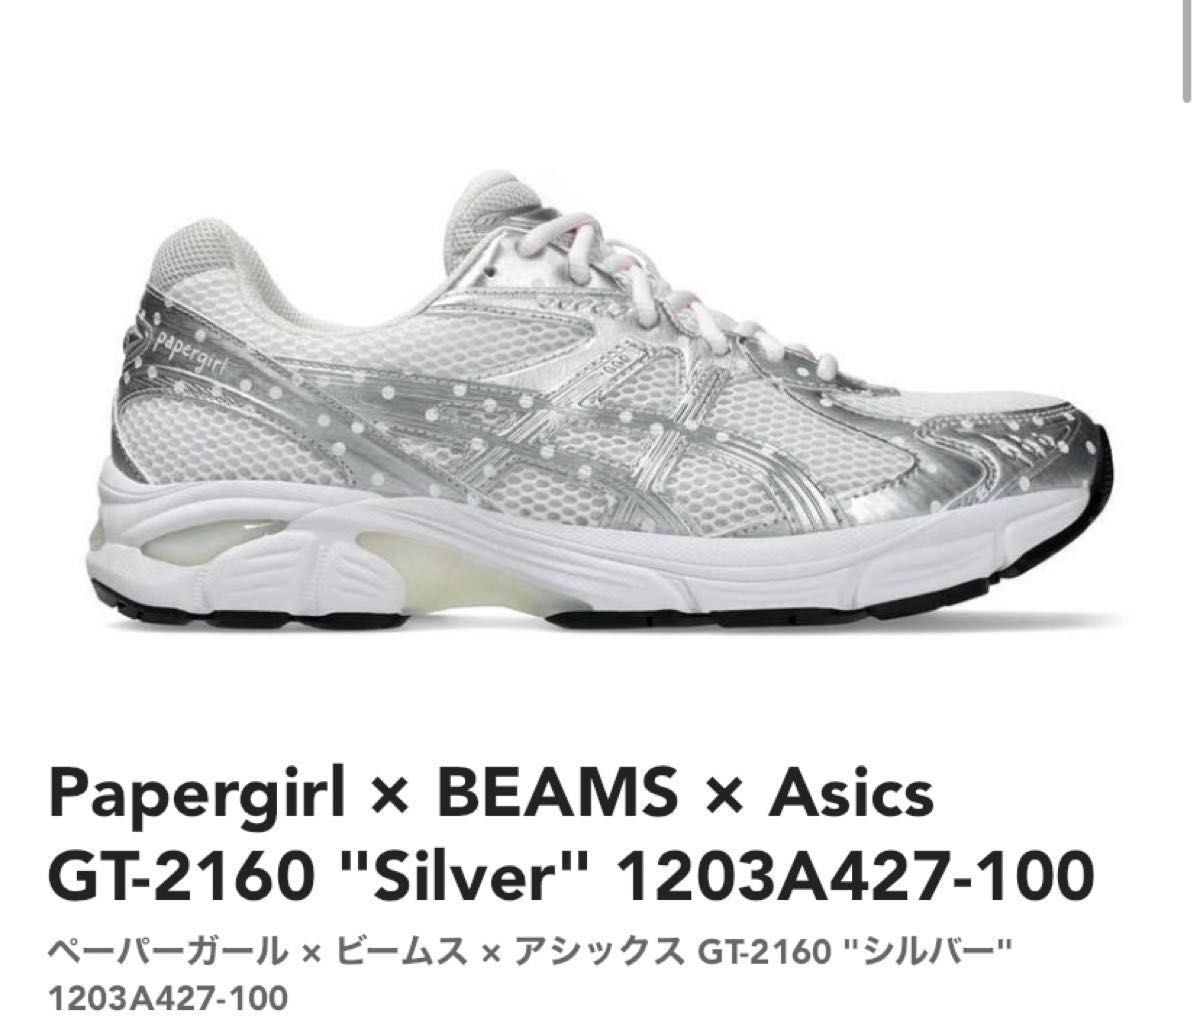 Papergirl × BEAMS × Asics GT-2160 "Silver" 1203A427-100